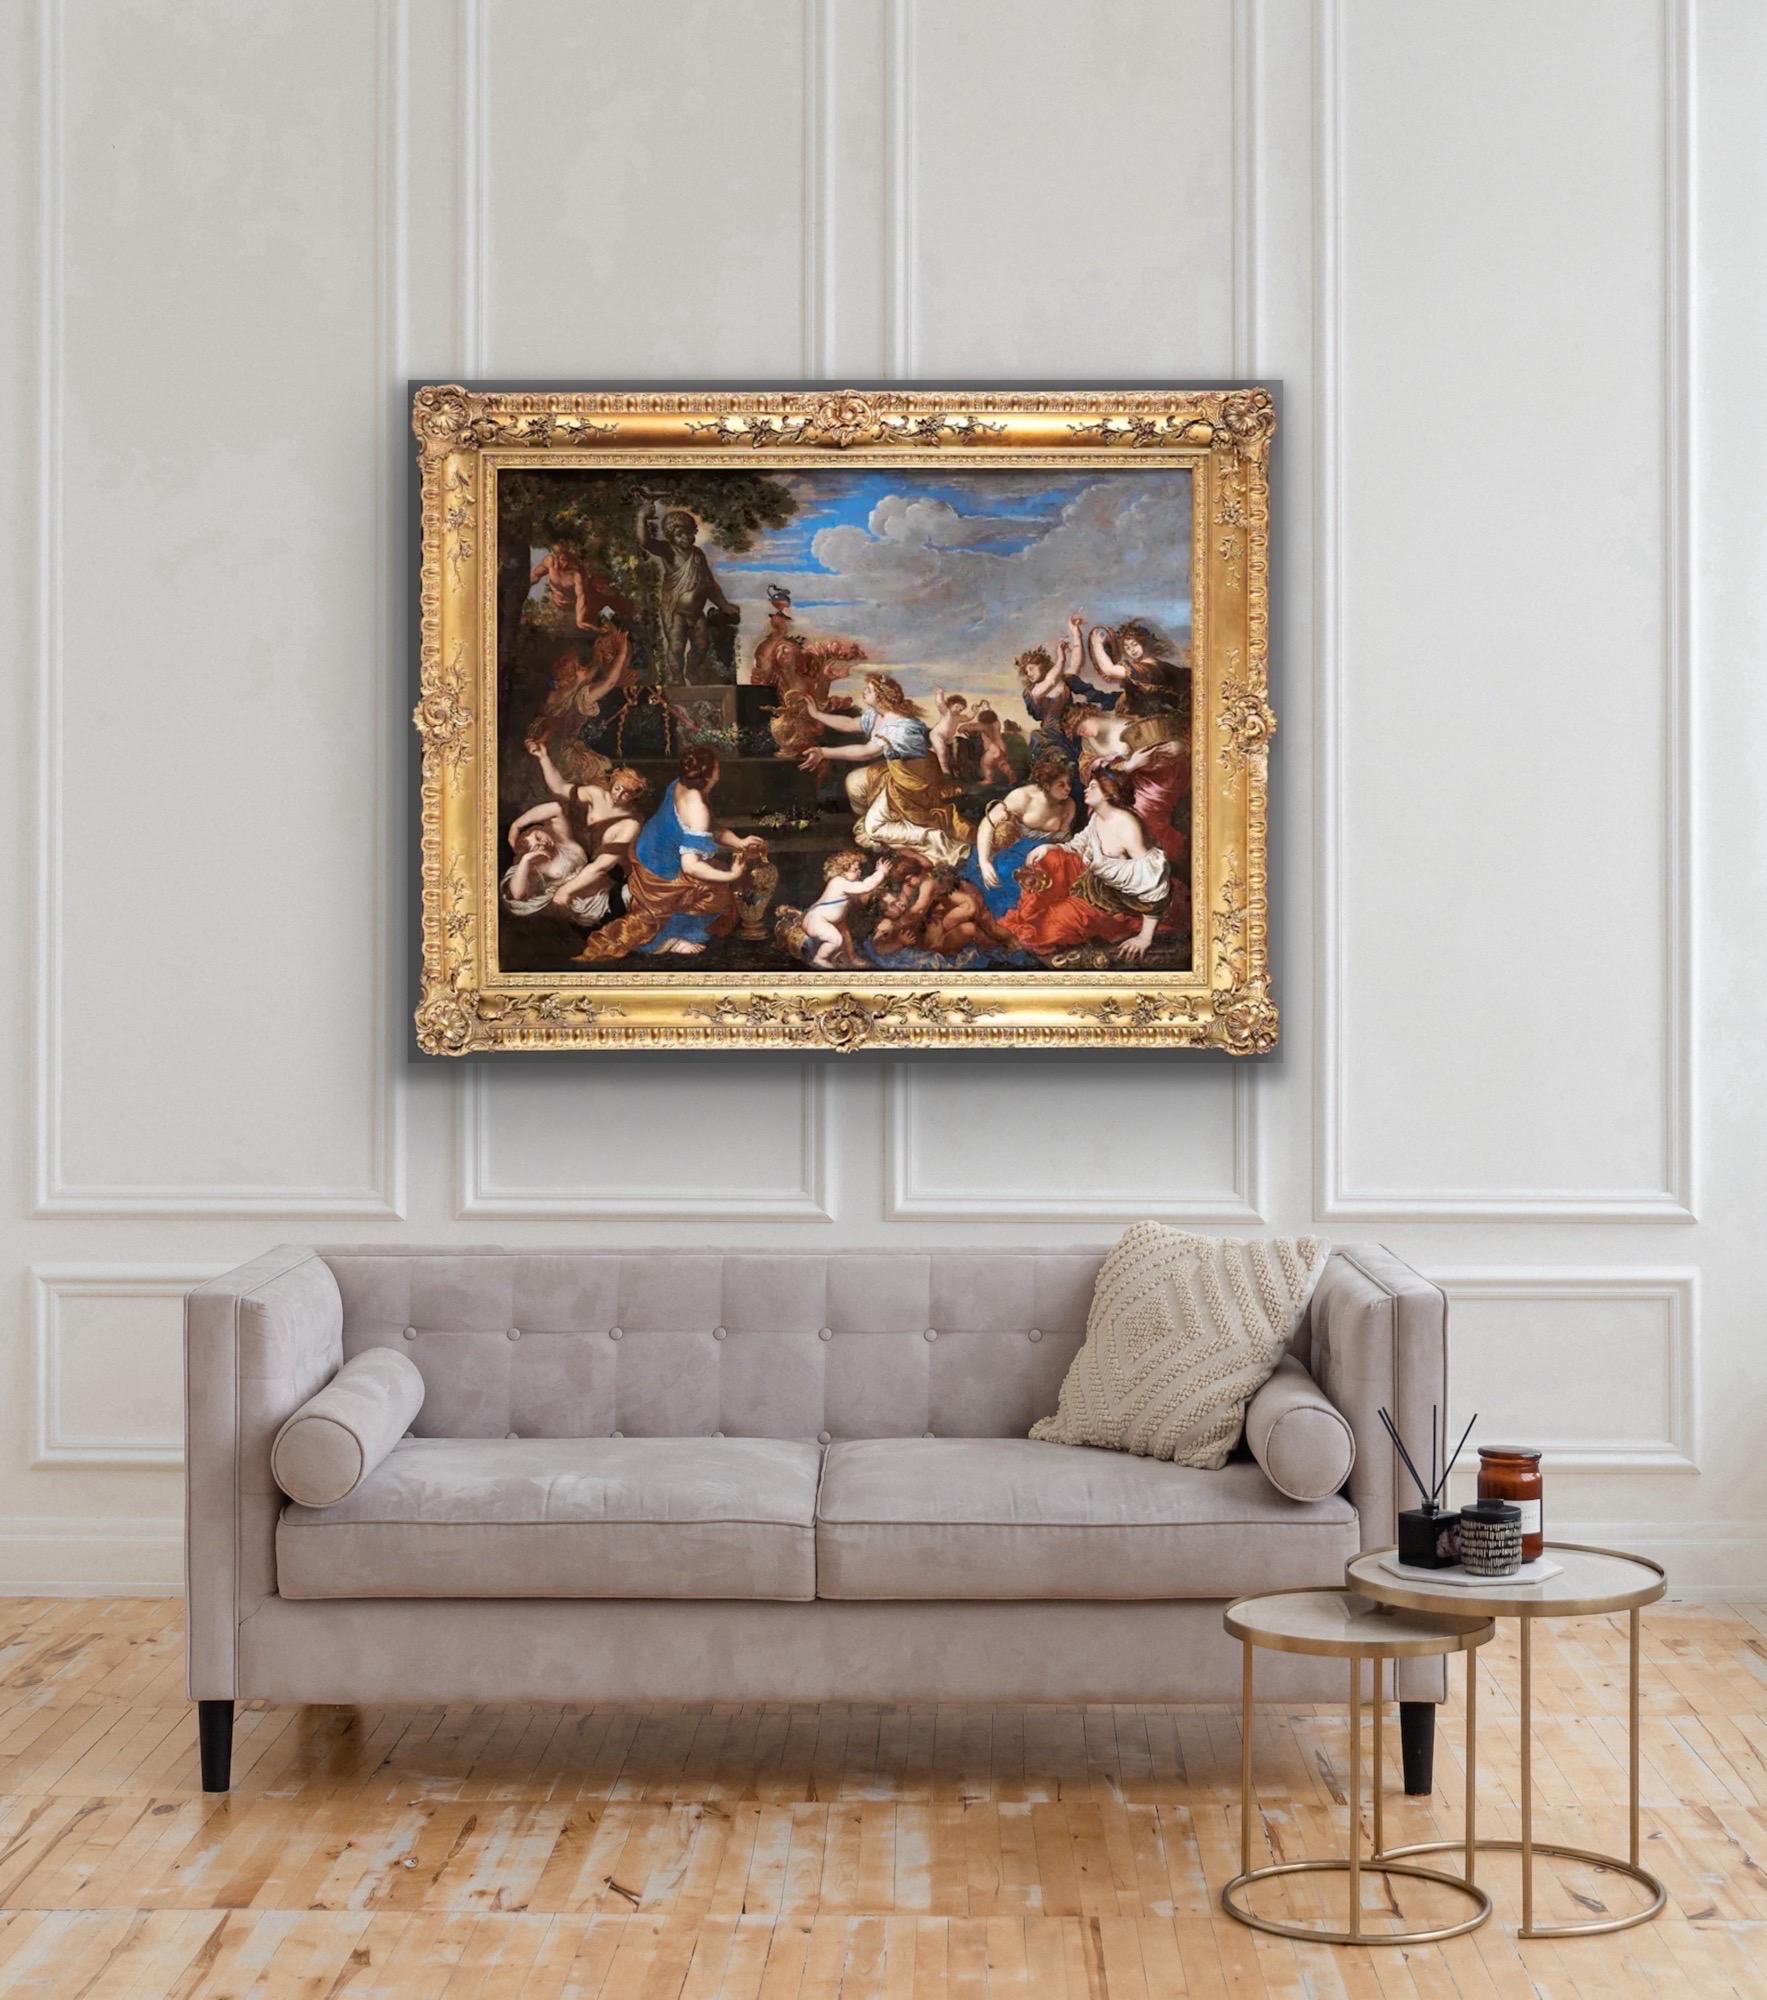 Huge 17th century old master - The feast of Bacchus - celebration Poussin For Sale 2